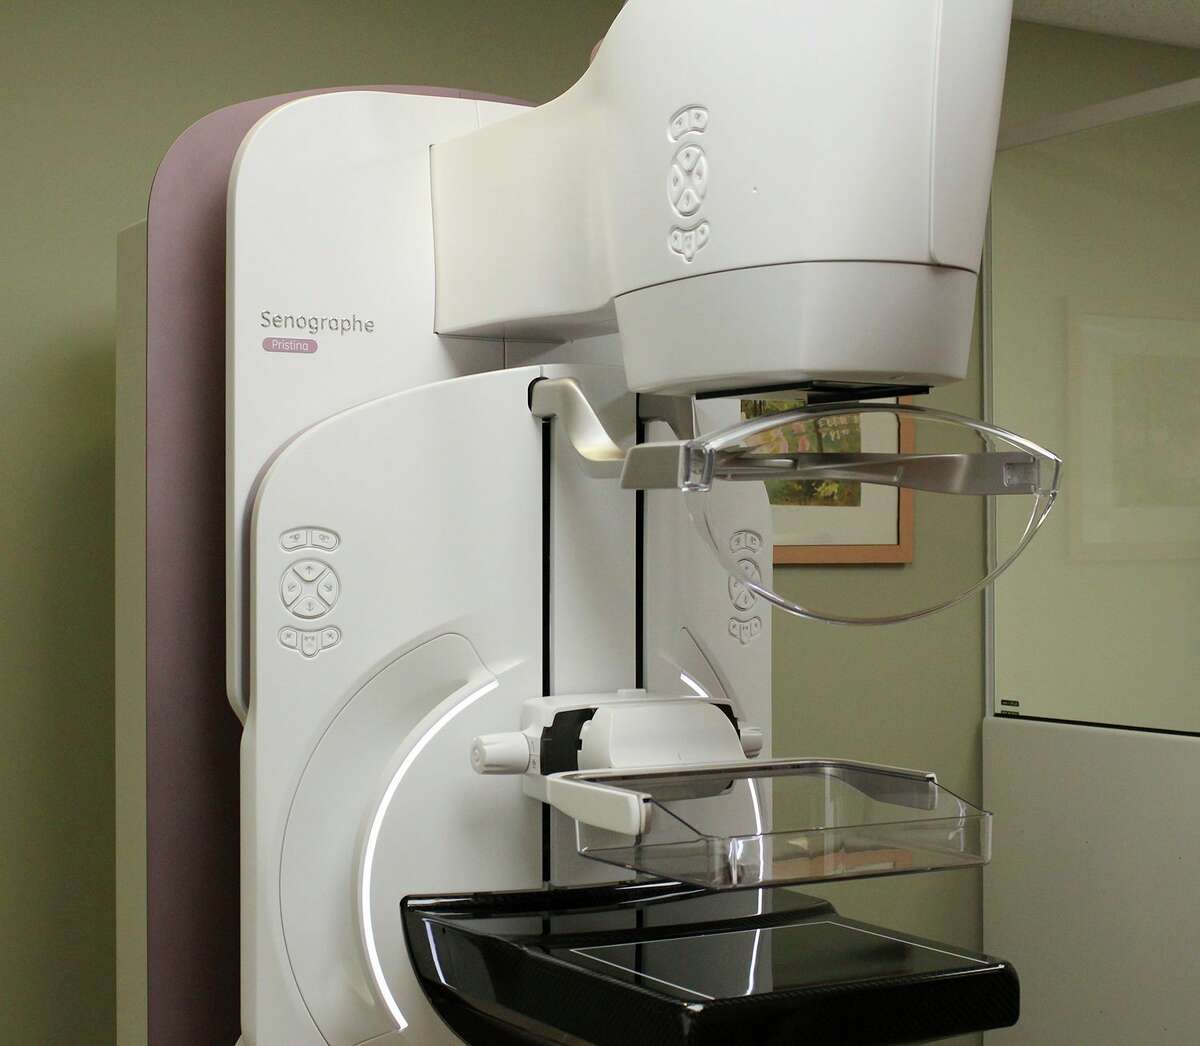 A mammography machine at Paul Oliver Memorial Hospital, which has been awarded a three-year term of accreditation in computed tomography and mammography as the result of a recent review by the American College of Radiology. (Courtesy Photo)